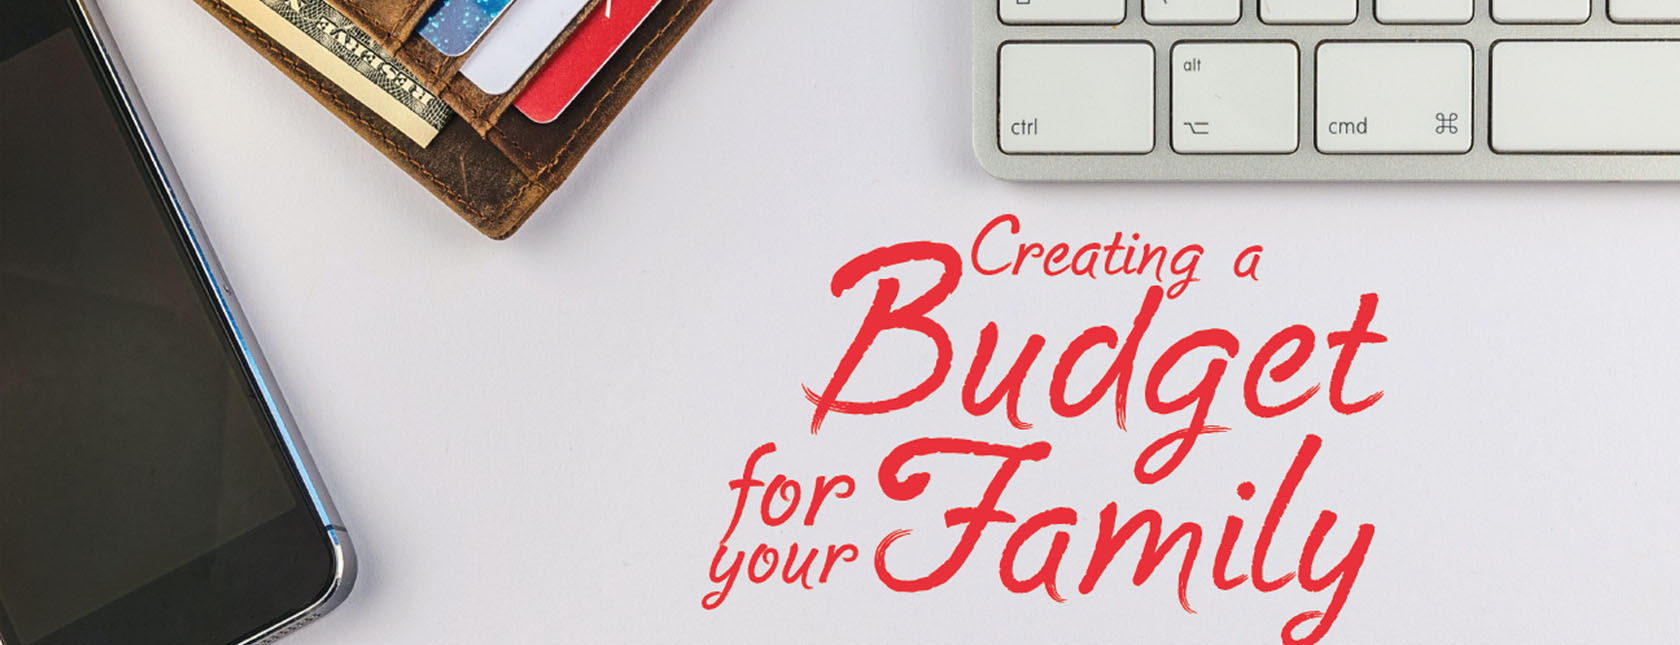 creating a budget for your family